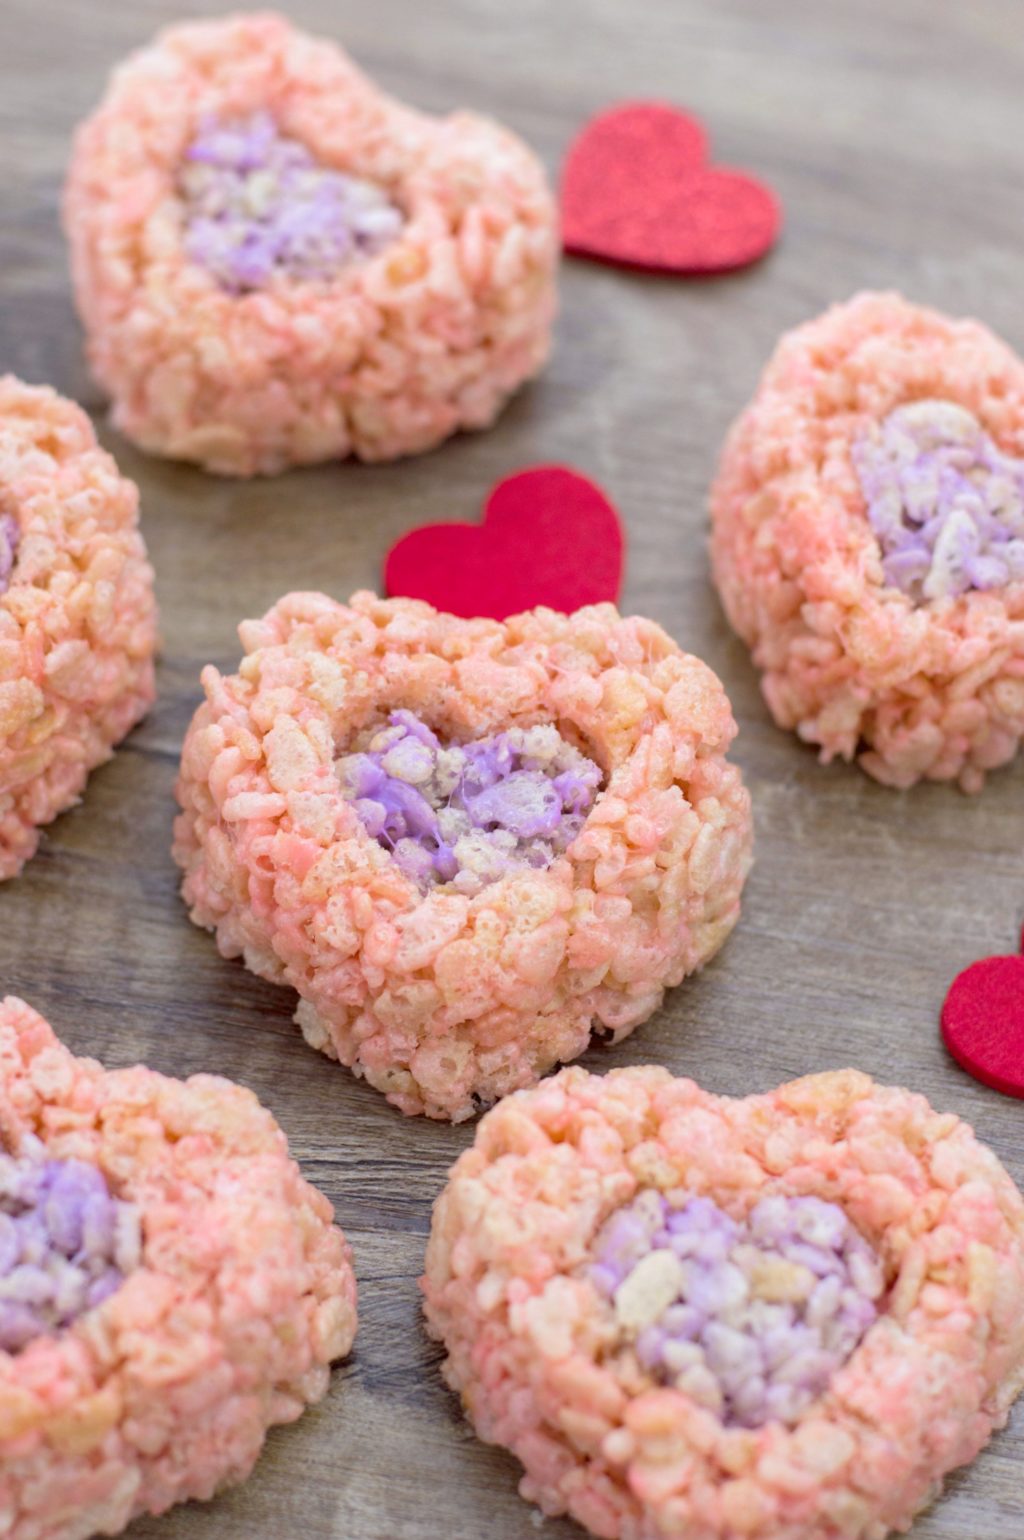 The finished Valentine's Day Rice Krispies treats on a wooden background with felt hearts to decorate.